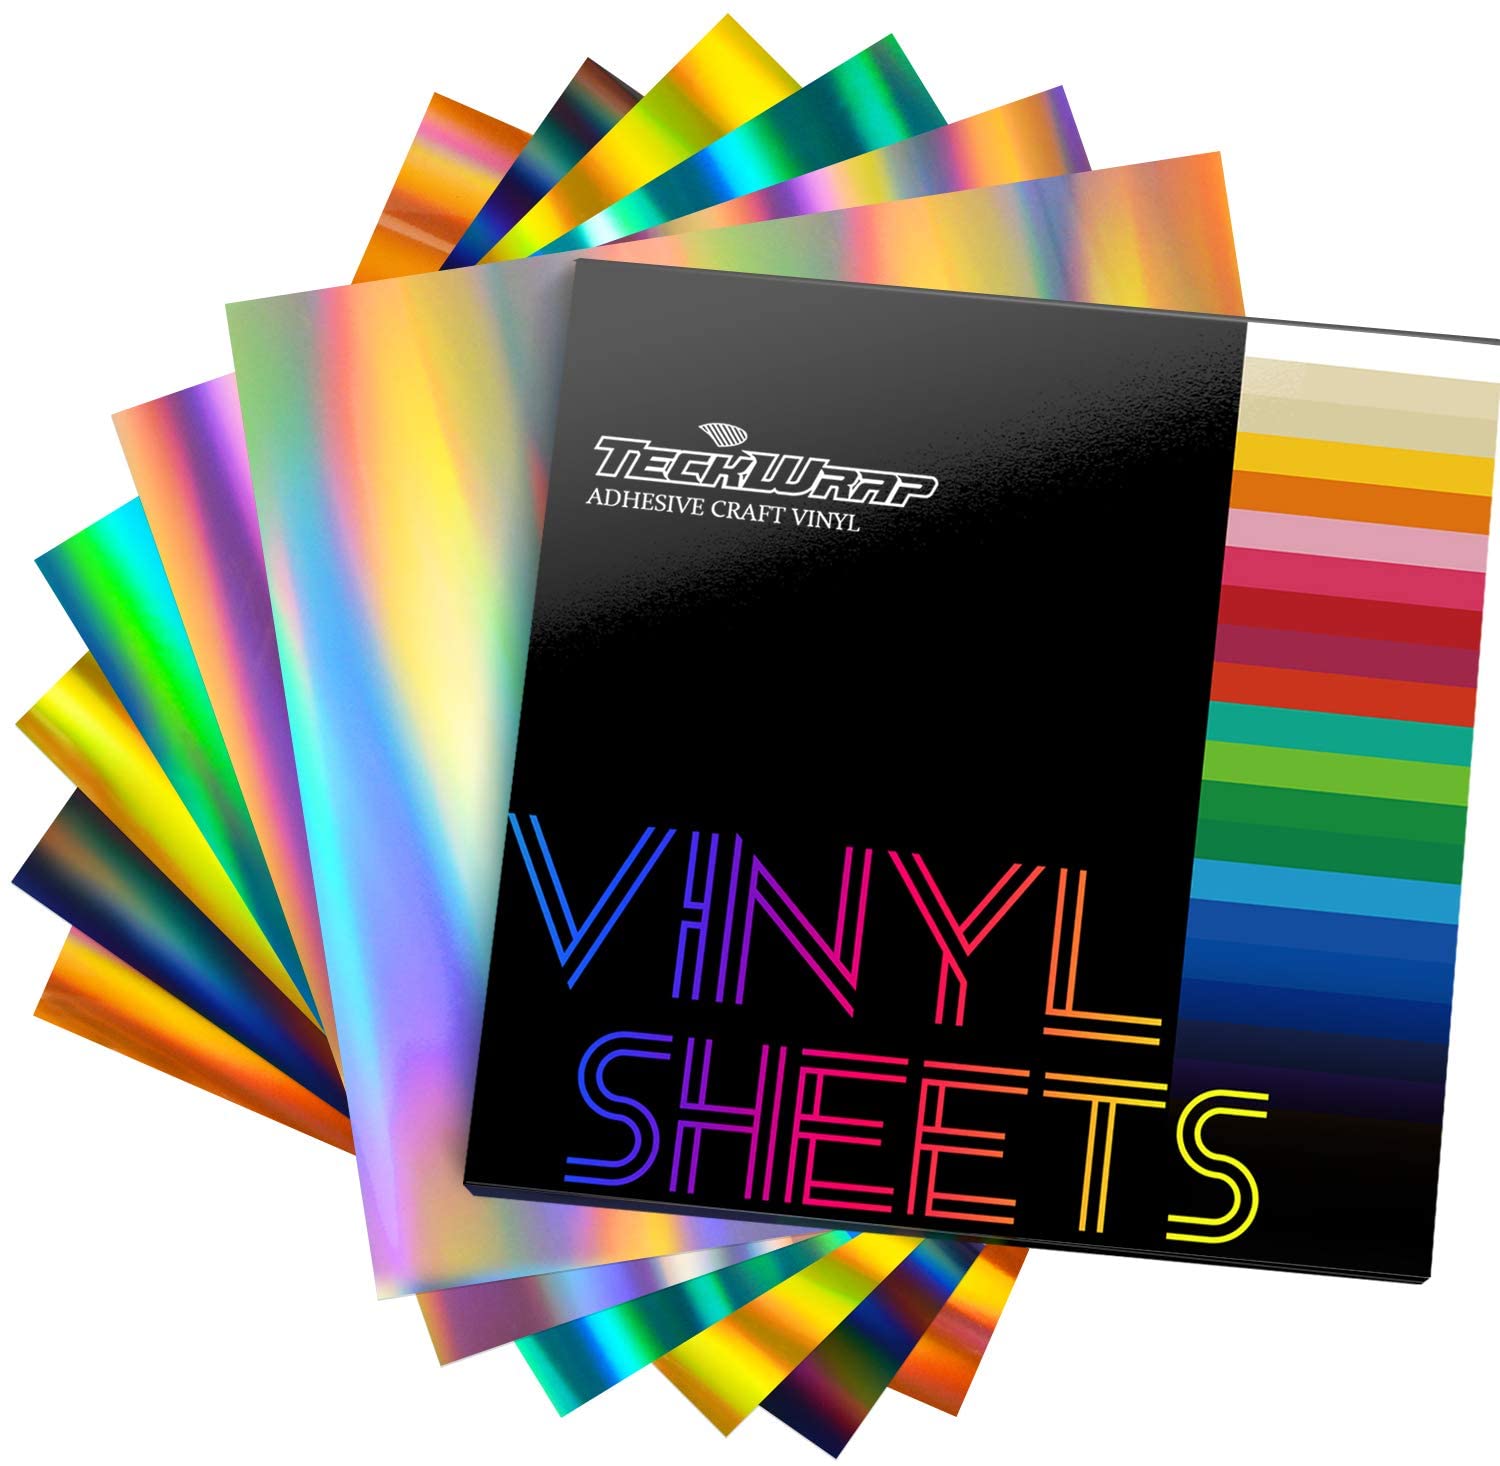 Holographic Glossy Rainbow Adhesive Vinyl Sheets Pack – TeckWrap Craft  Europe